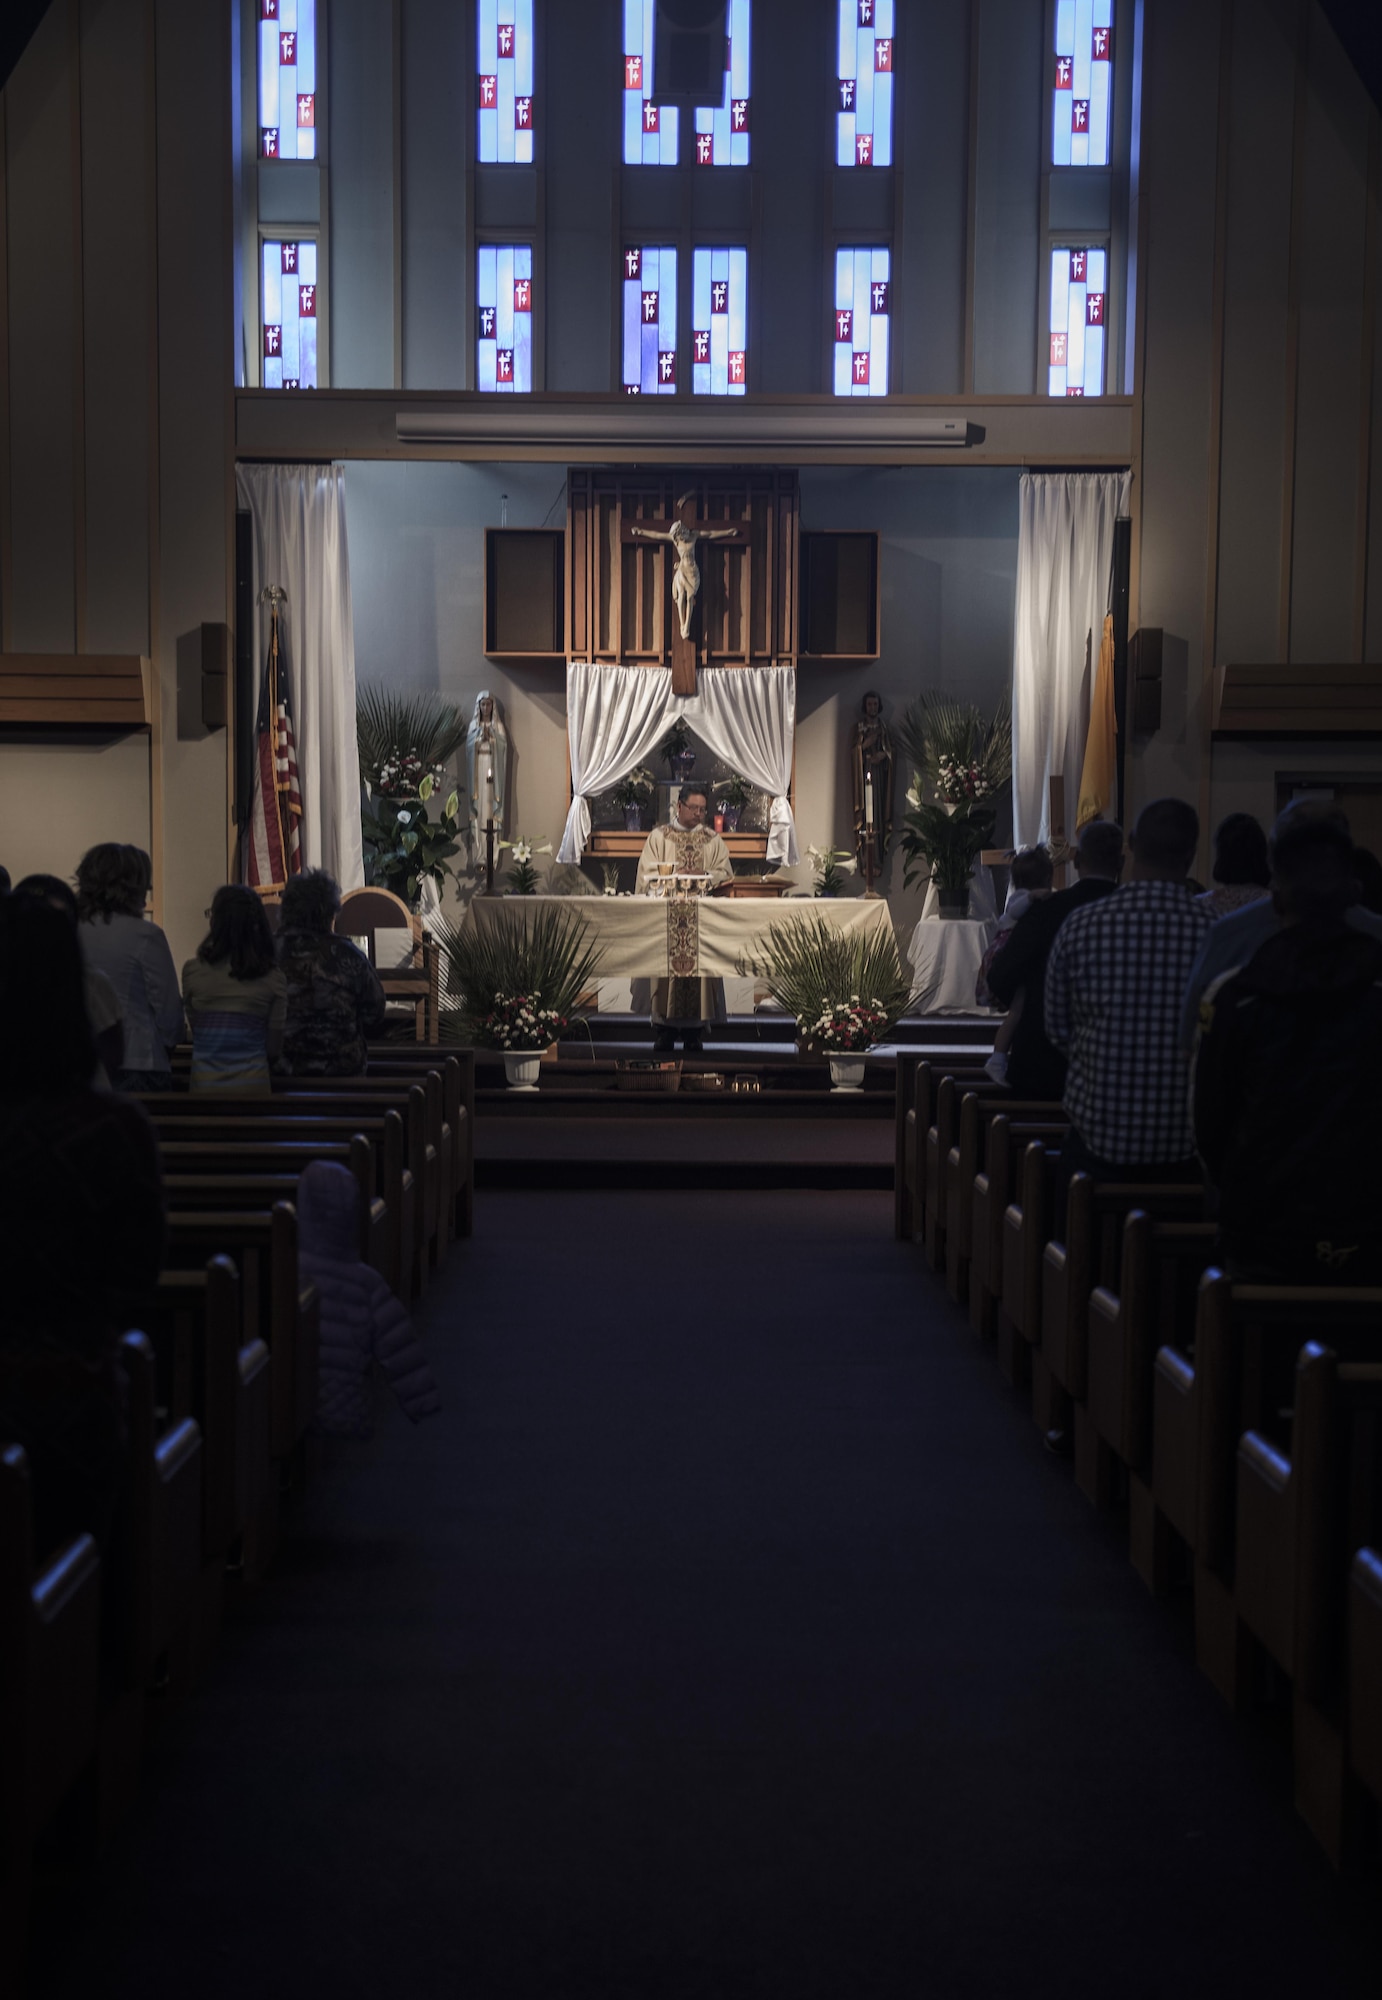 Father Juan Salonga, 92nd Air Refueling GS Catholic Priest, leads a catholic Easter service April 16, 2017, at Fairchild Air Force Base, Washington.  The chaplain corps exists to support free exercise of religion according to the First Amendment of the Constitution of the United States of America. At each base, chaplains support the religious freedom of Airmen and their families and help with spiritual resilience. (U.S. Air Force photo/Airman 1st Class Sean Campbell)